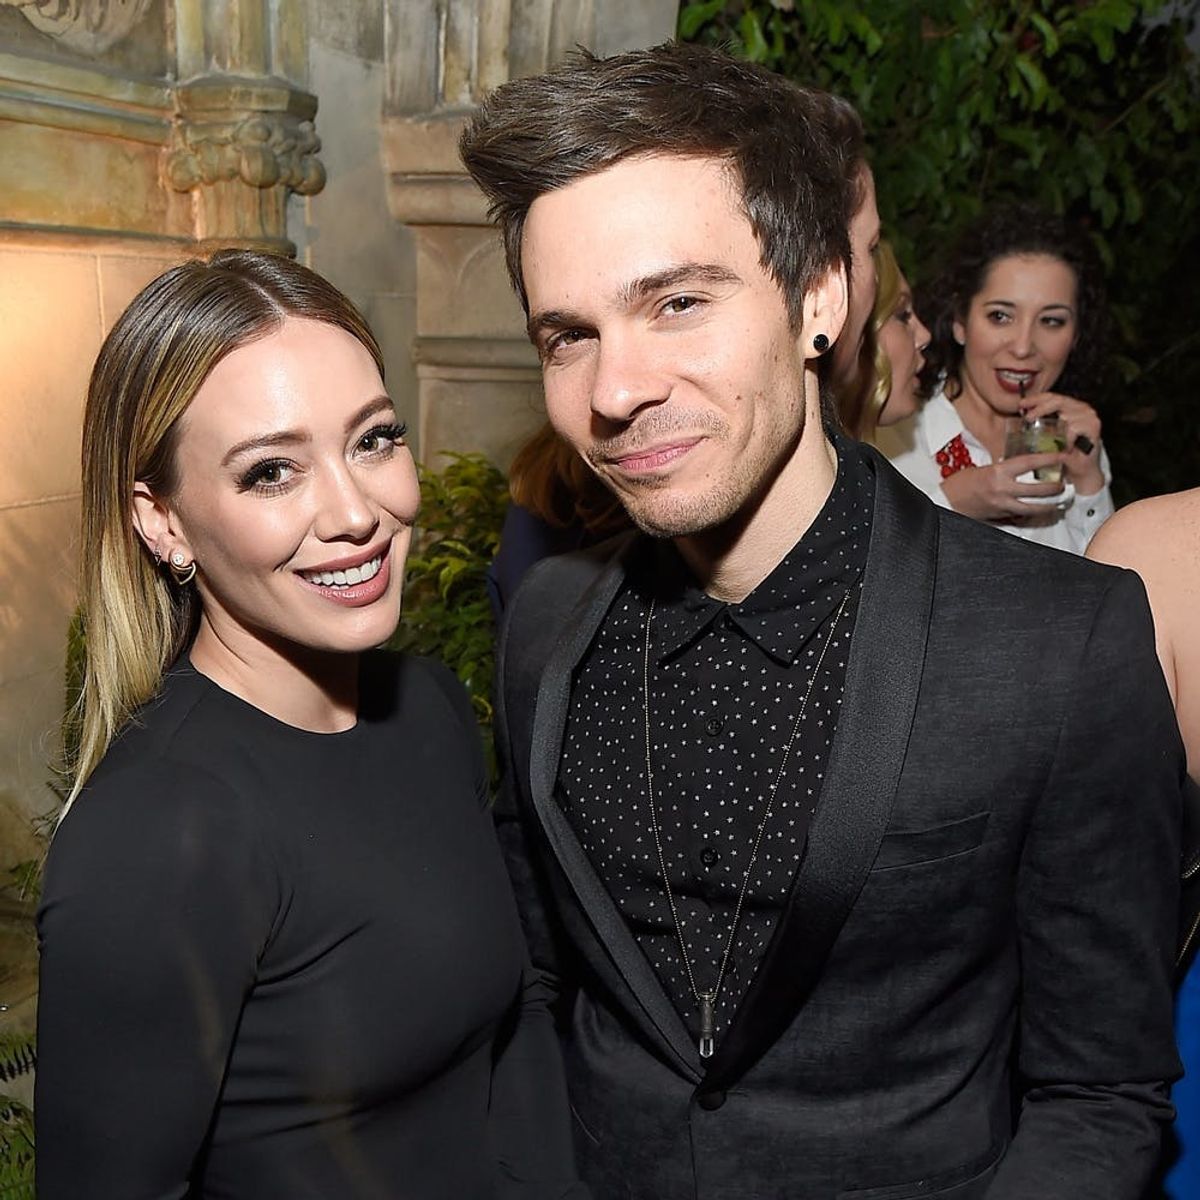 Hilary Duff Is Pregnant With Baby #2!